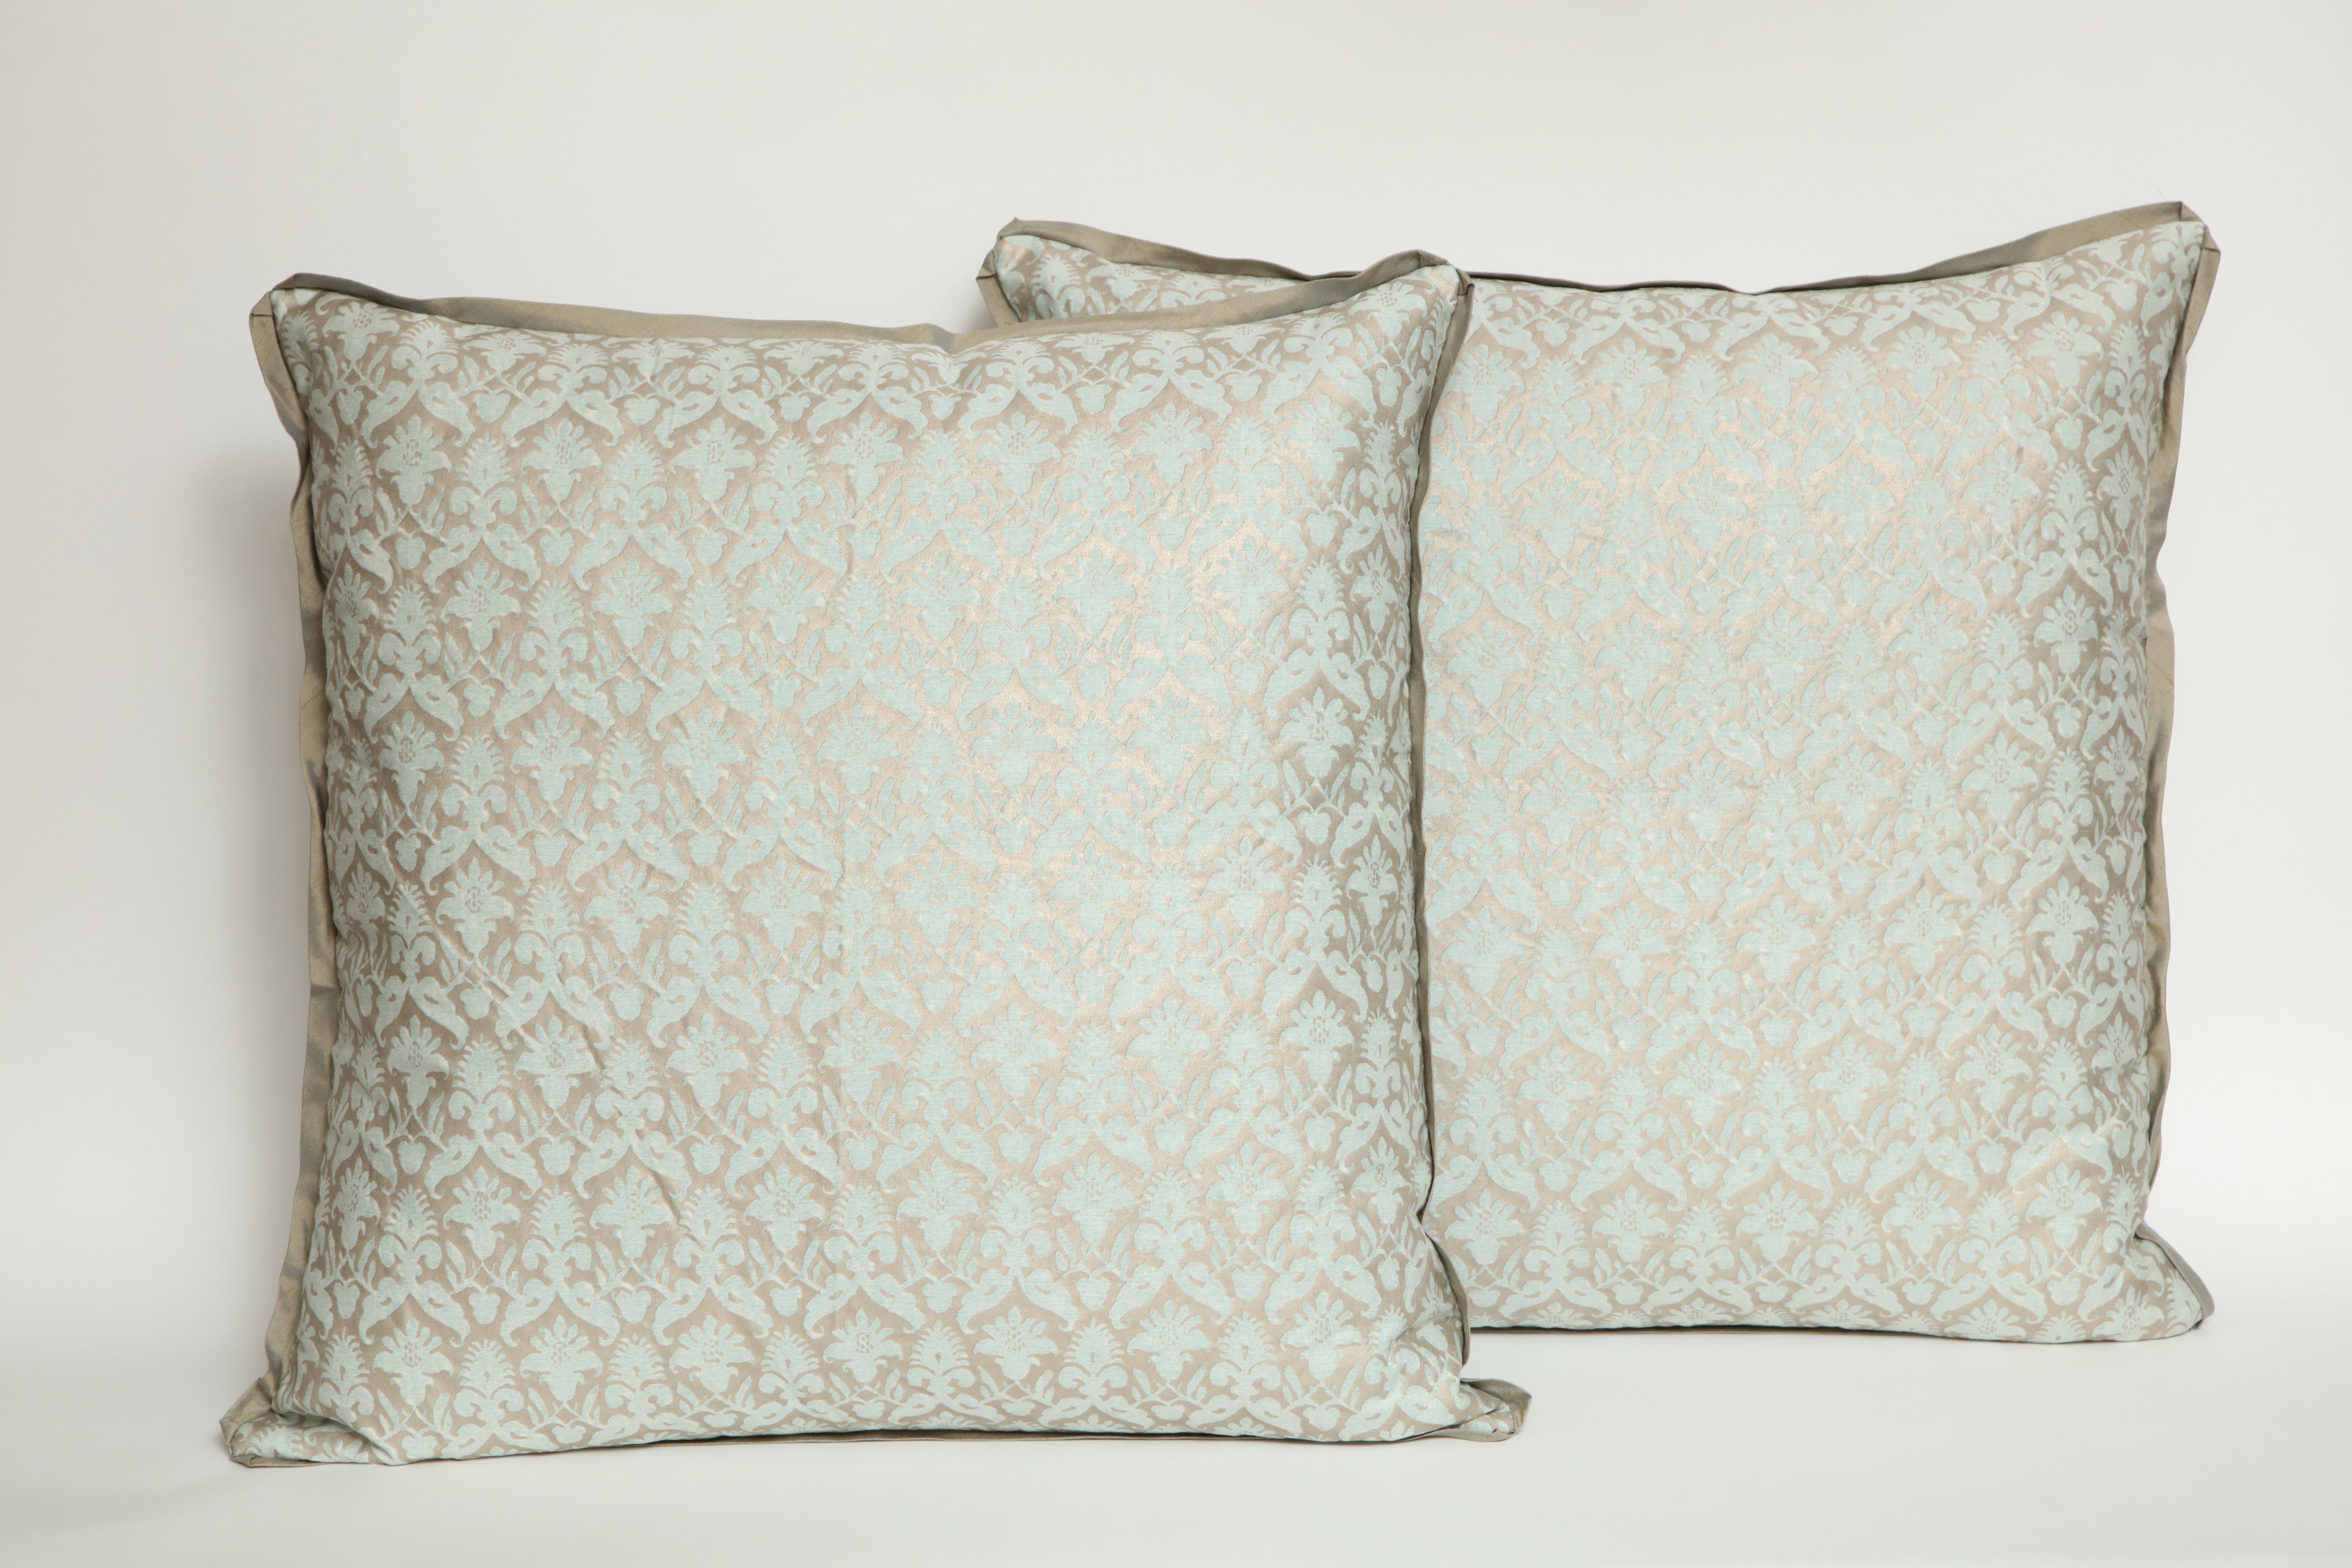 A pair of Fortuny fabric cushions in the Delfino pattern, aquamarine and silver color way with silk bias edging, the pattern, a 17th century French design in the Louis XIII style. Newly made using vintage Fortuny fabric. 50 down/50 feather insert.